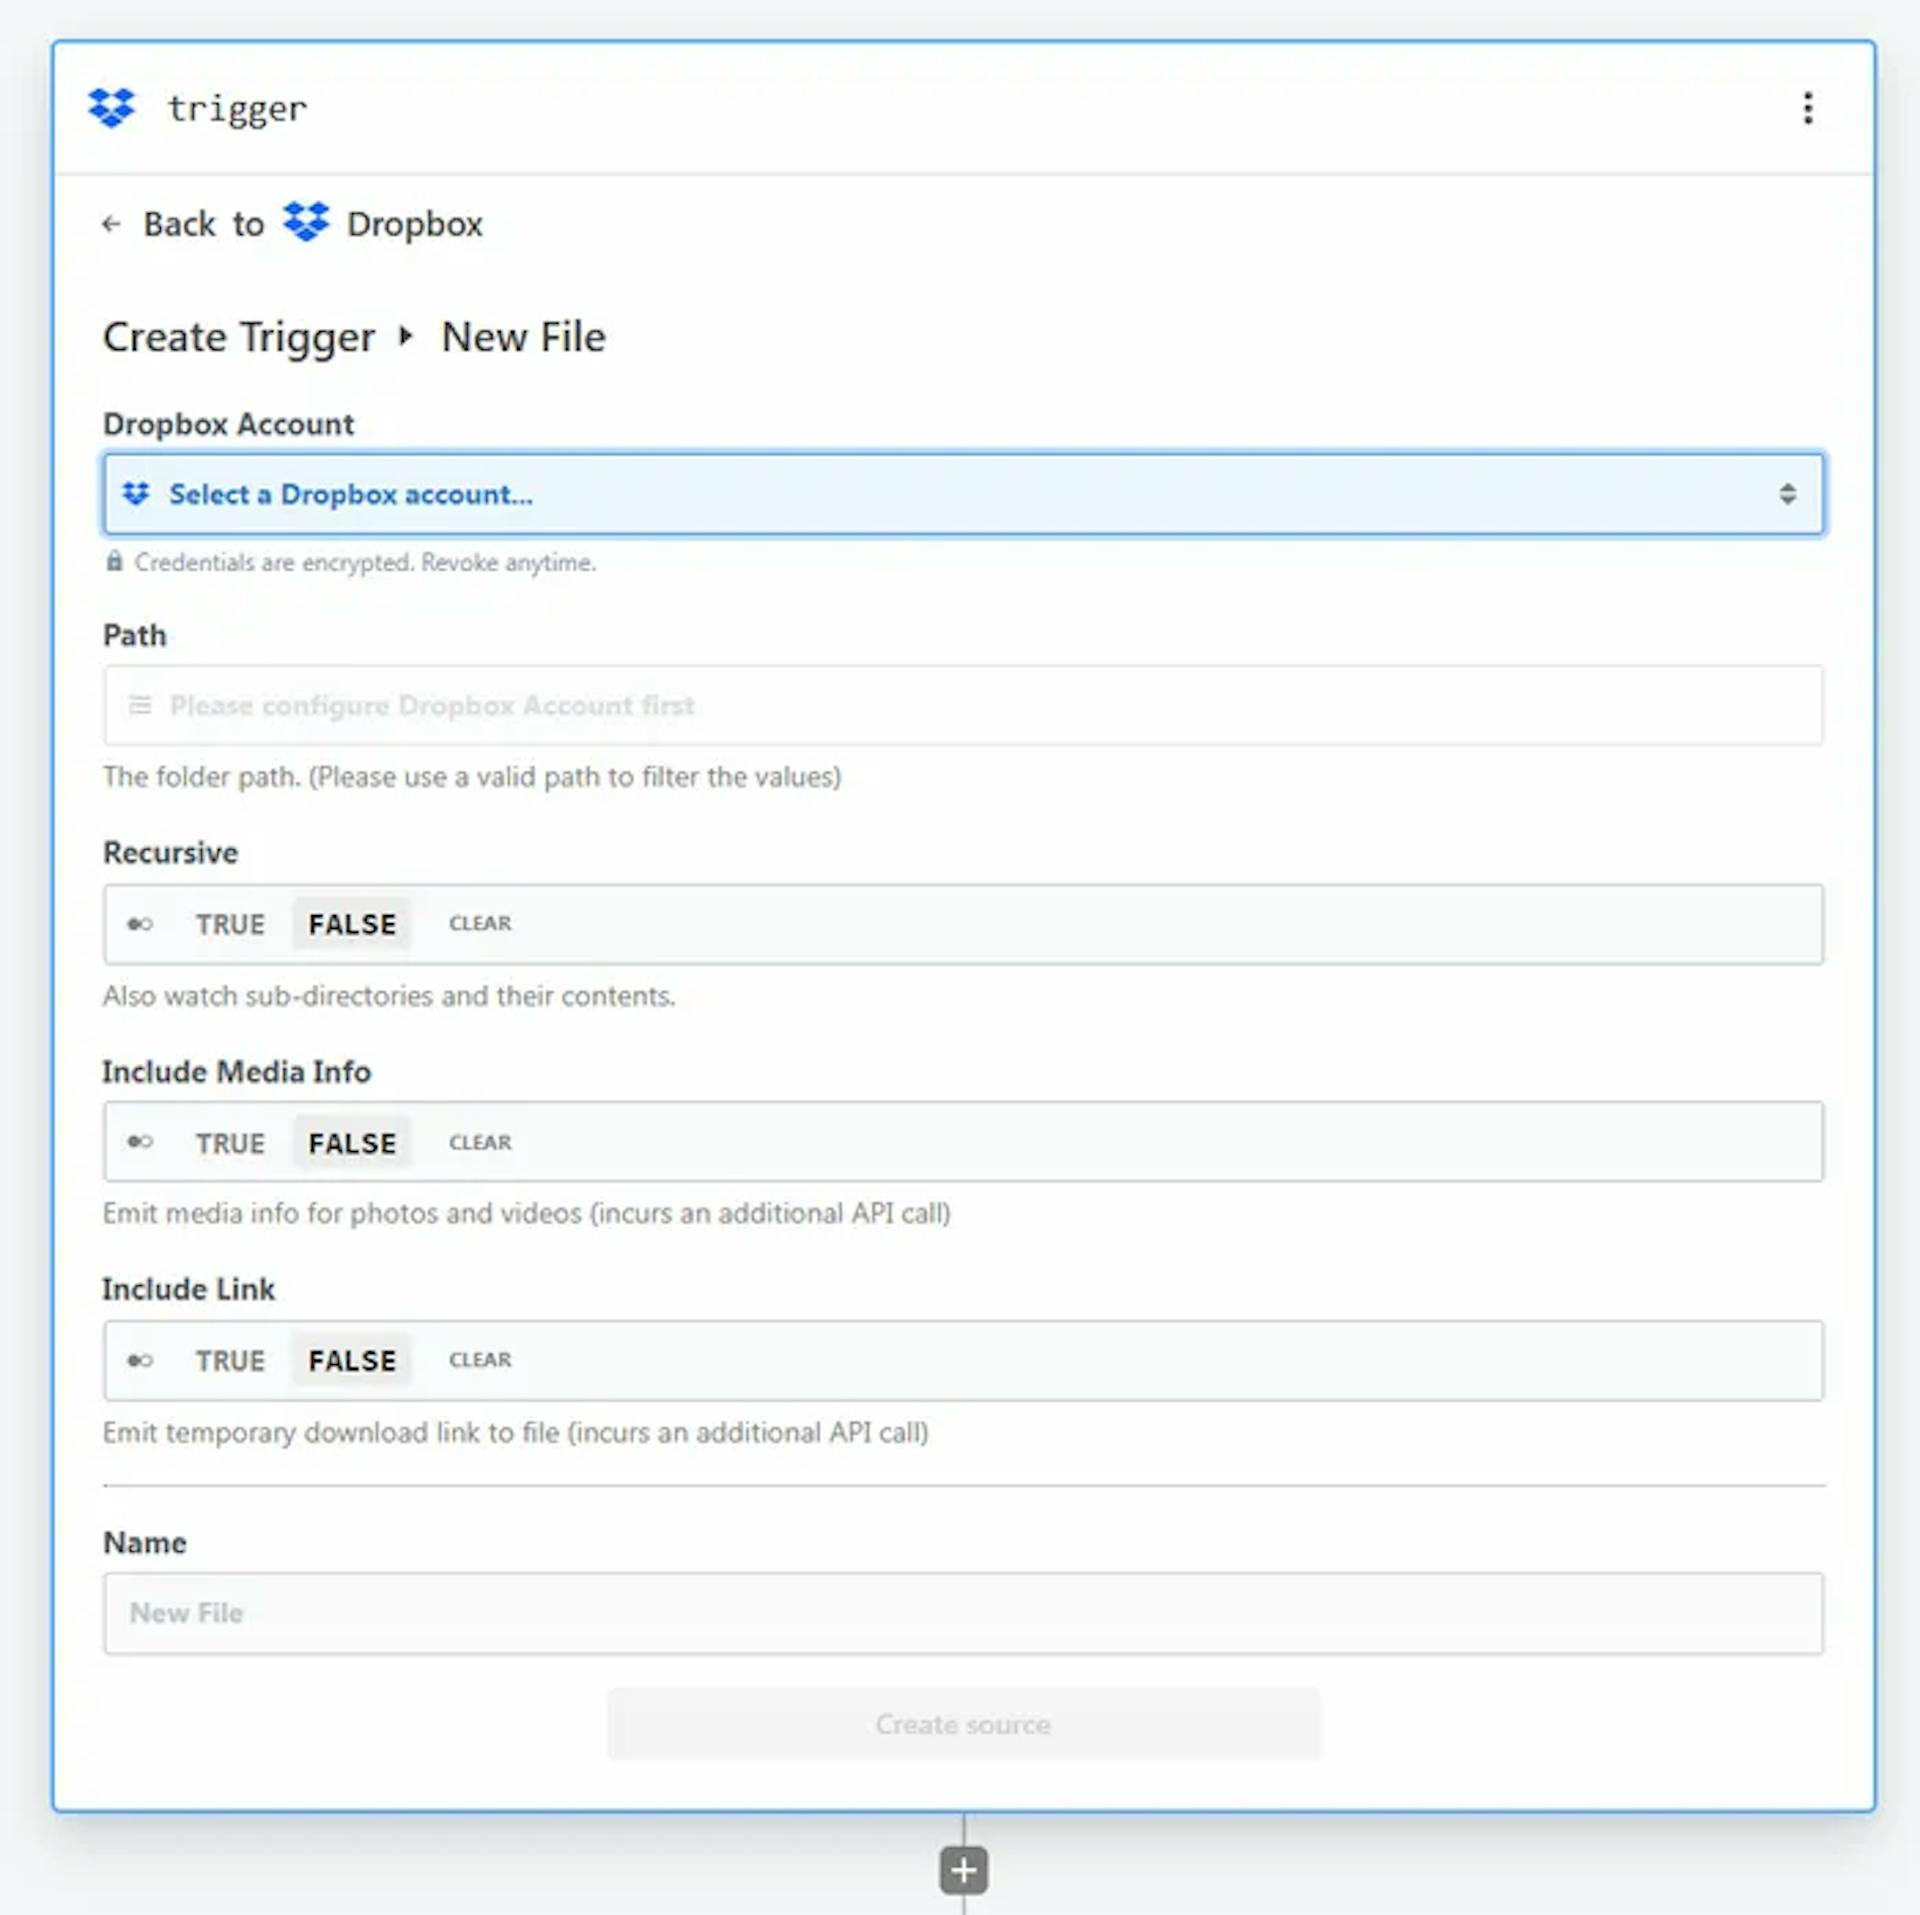 Specifying options for the Dropbox New File trigger